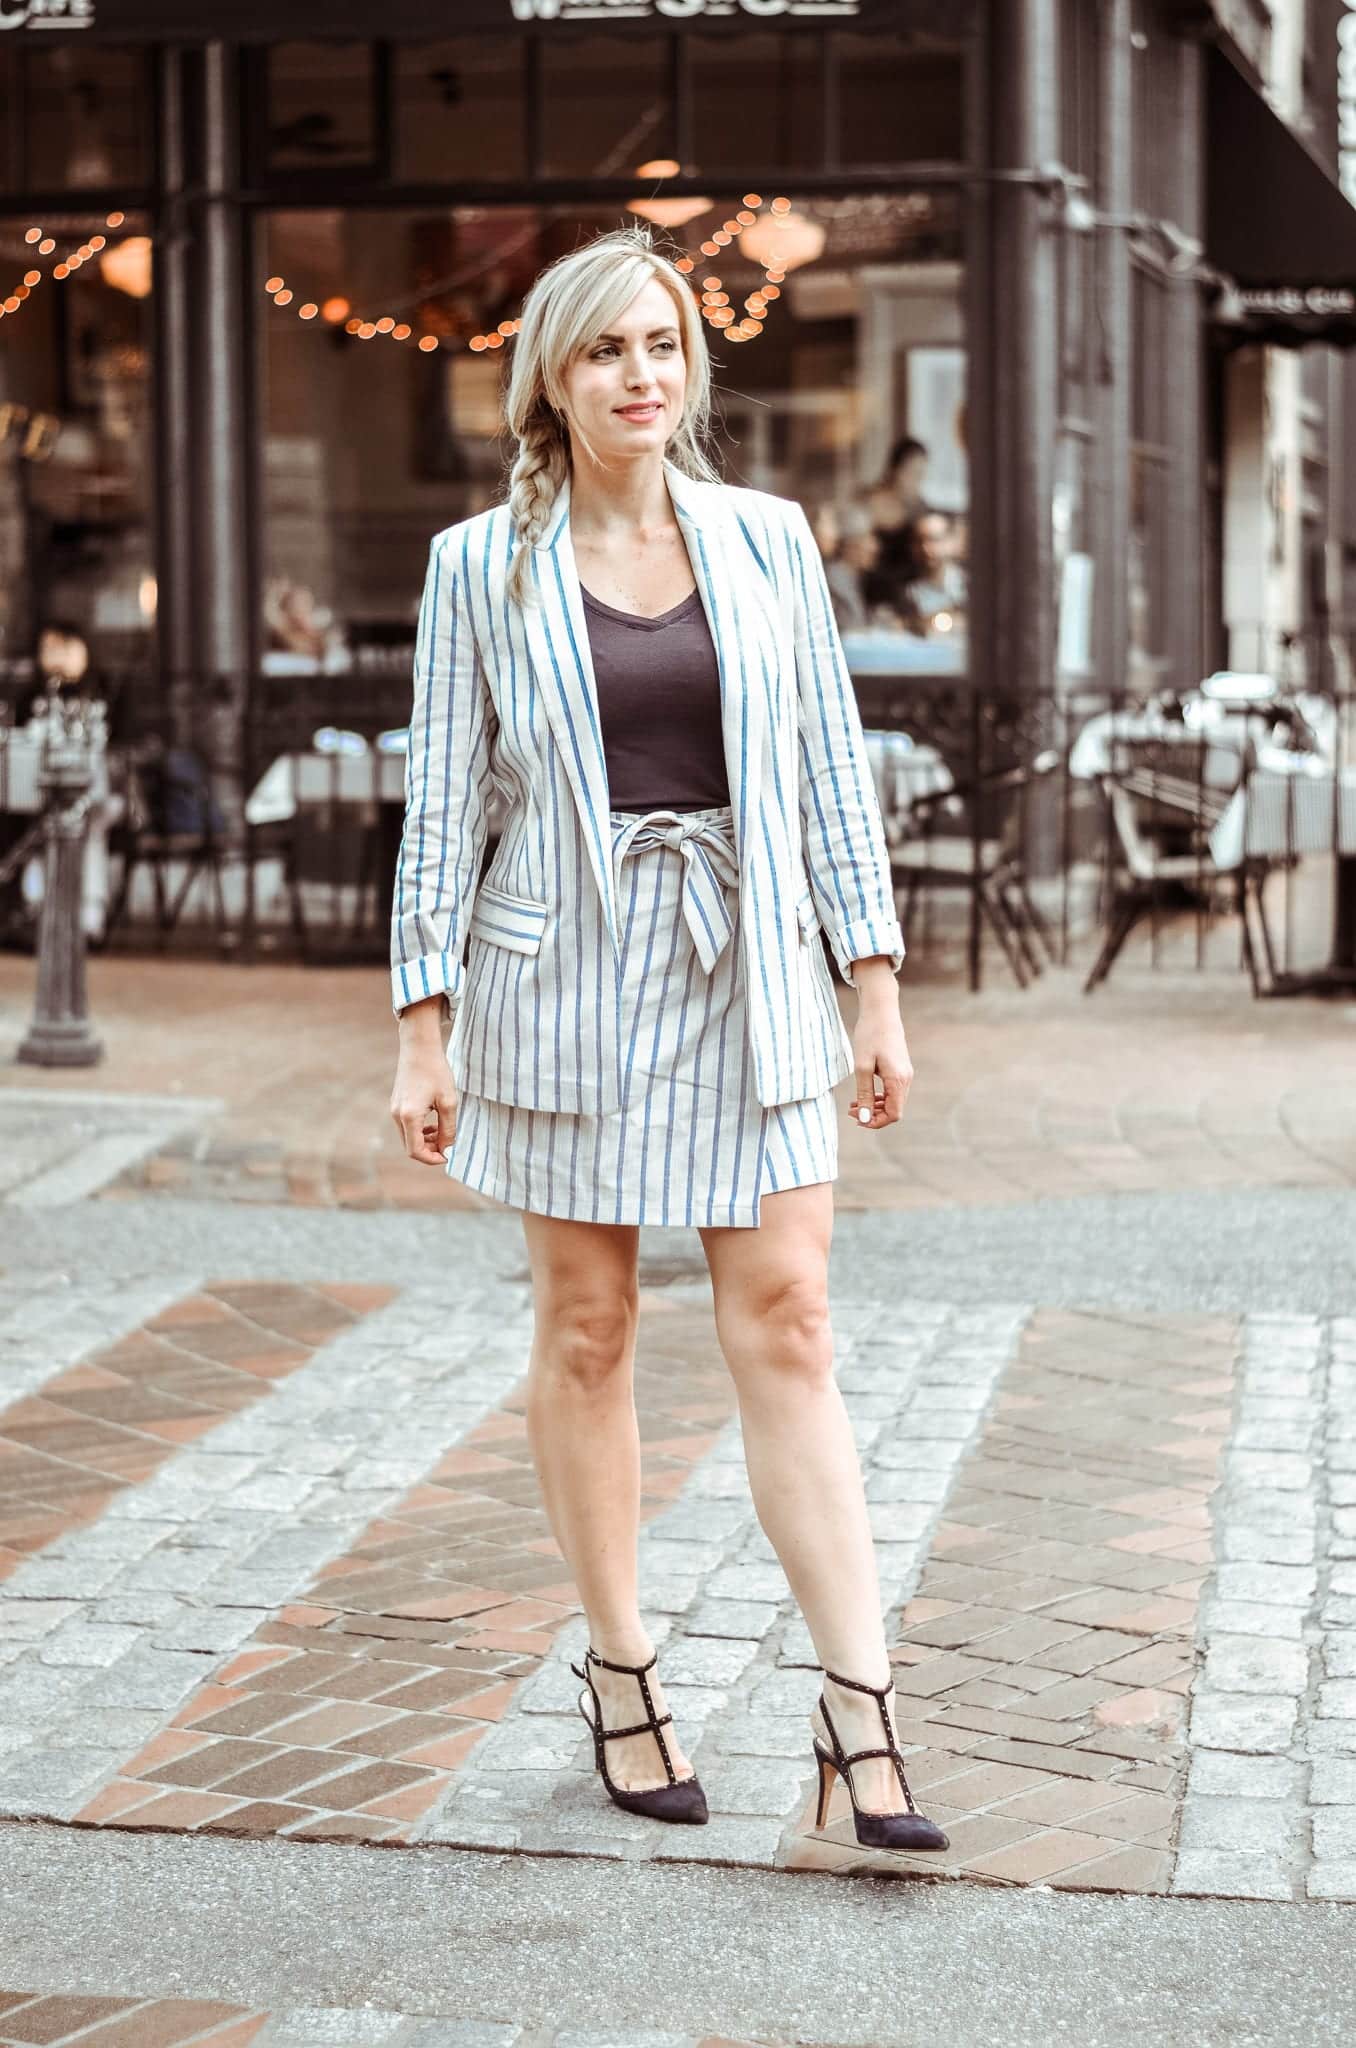 Striped Suits for Women - 17 Ways to Style a Pinstripe Suit